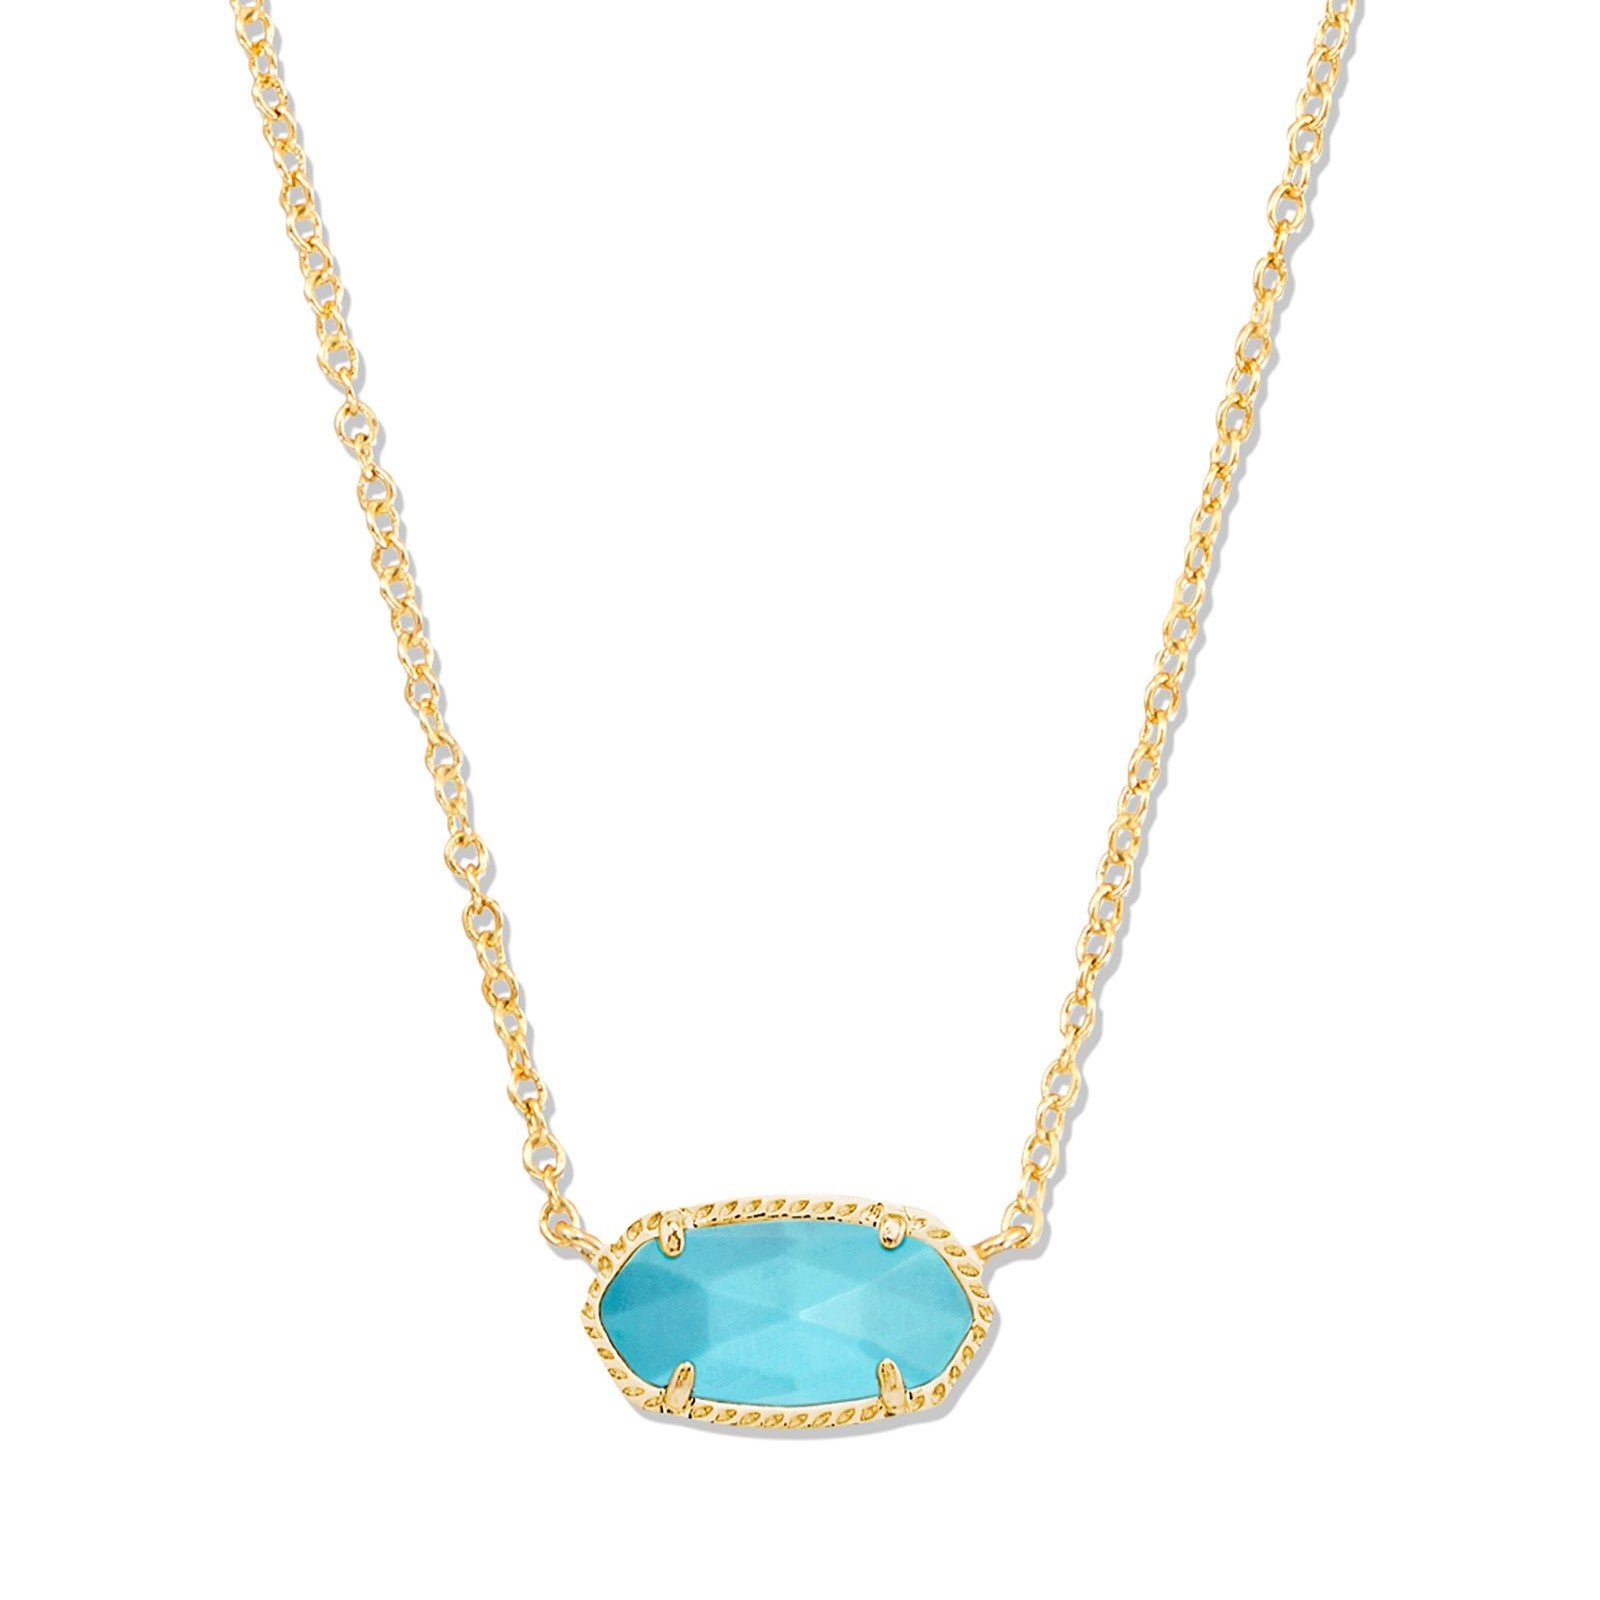 Kendra Scott | Elisa Gold Pendant Necklace in Variegated Turquoise Magnesite - Giddy Up Glamour Boutique